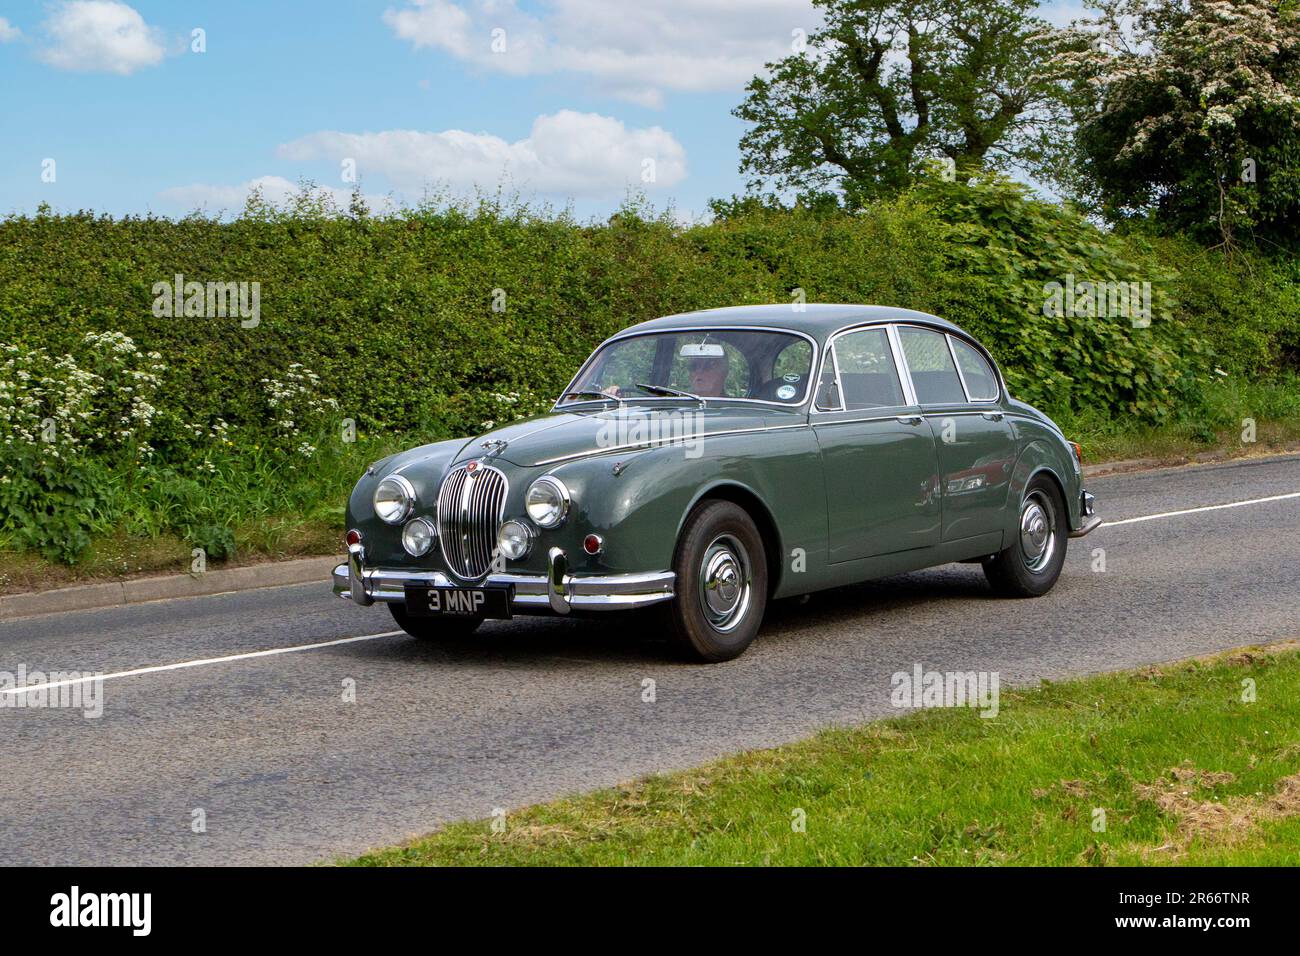 1962 60s Green Jaguar MK II Classic vintage car, Yesteryear motors en route to Capesthorne Hall Vintage Collectors show, Cheshire, UK Stock Photo